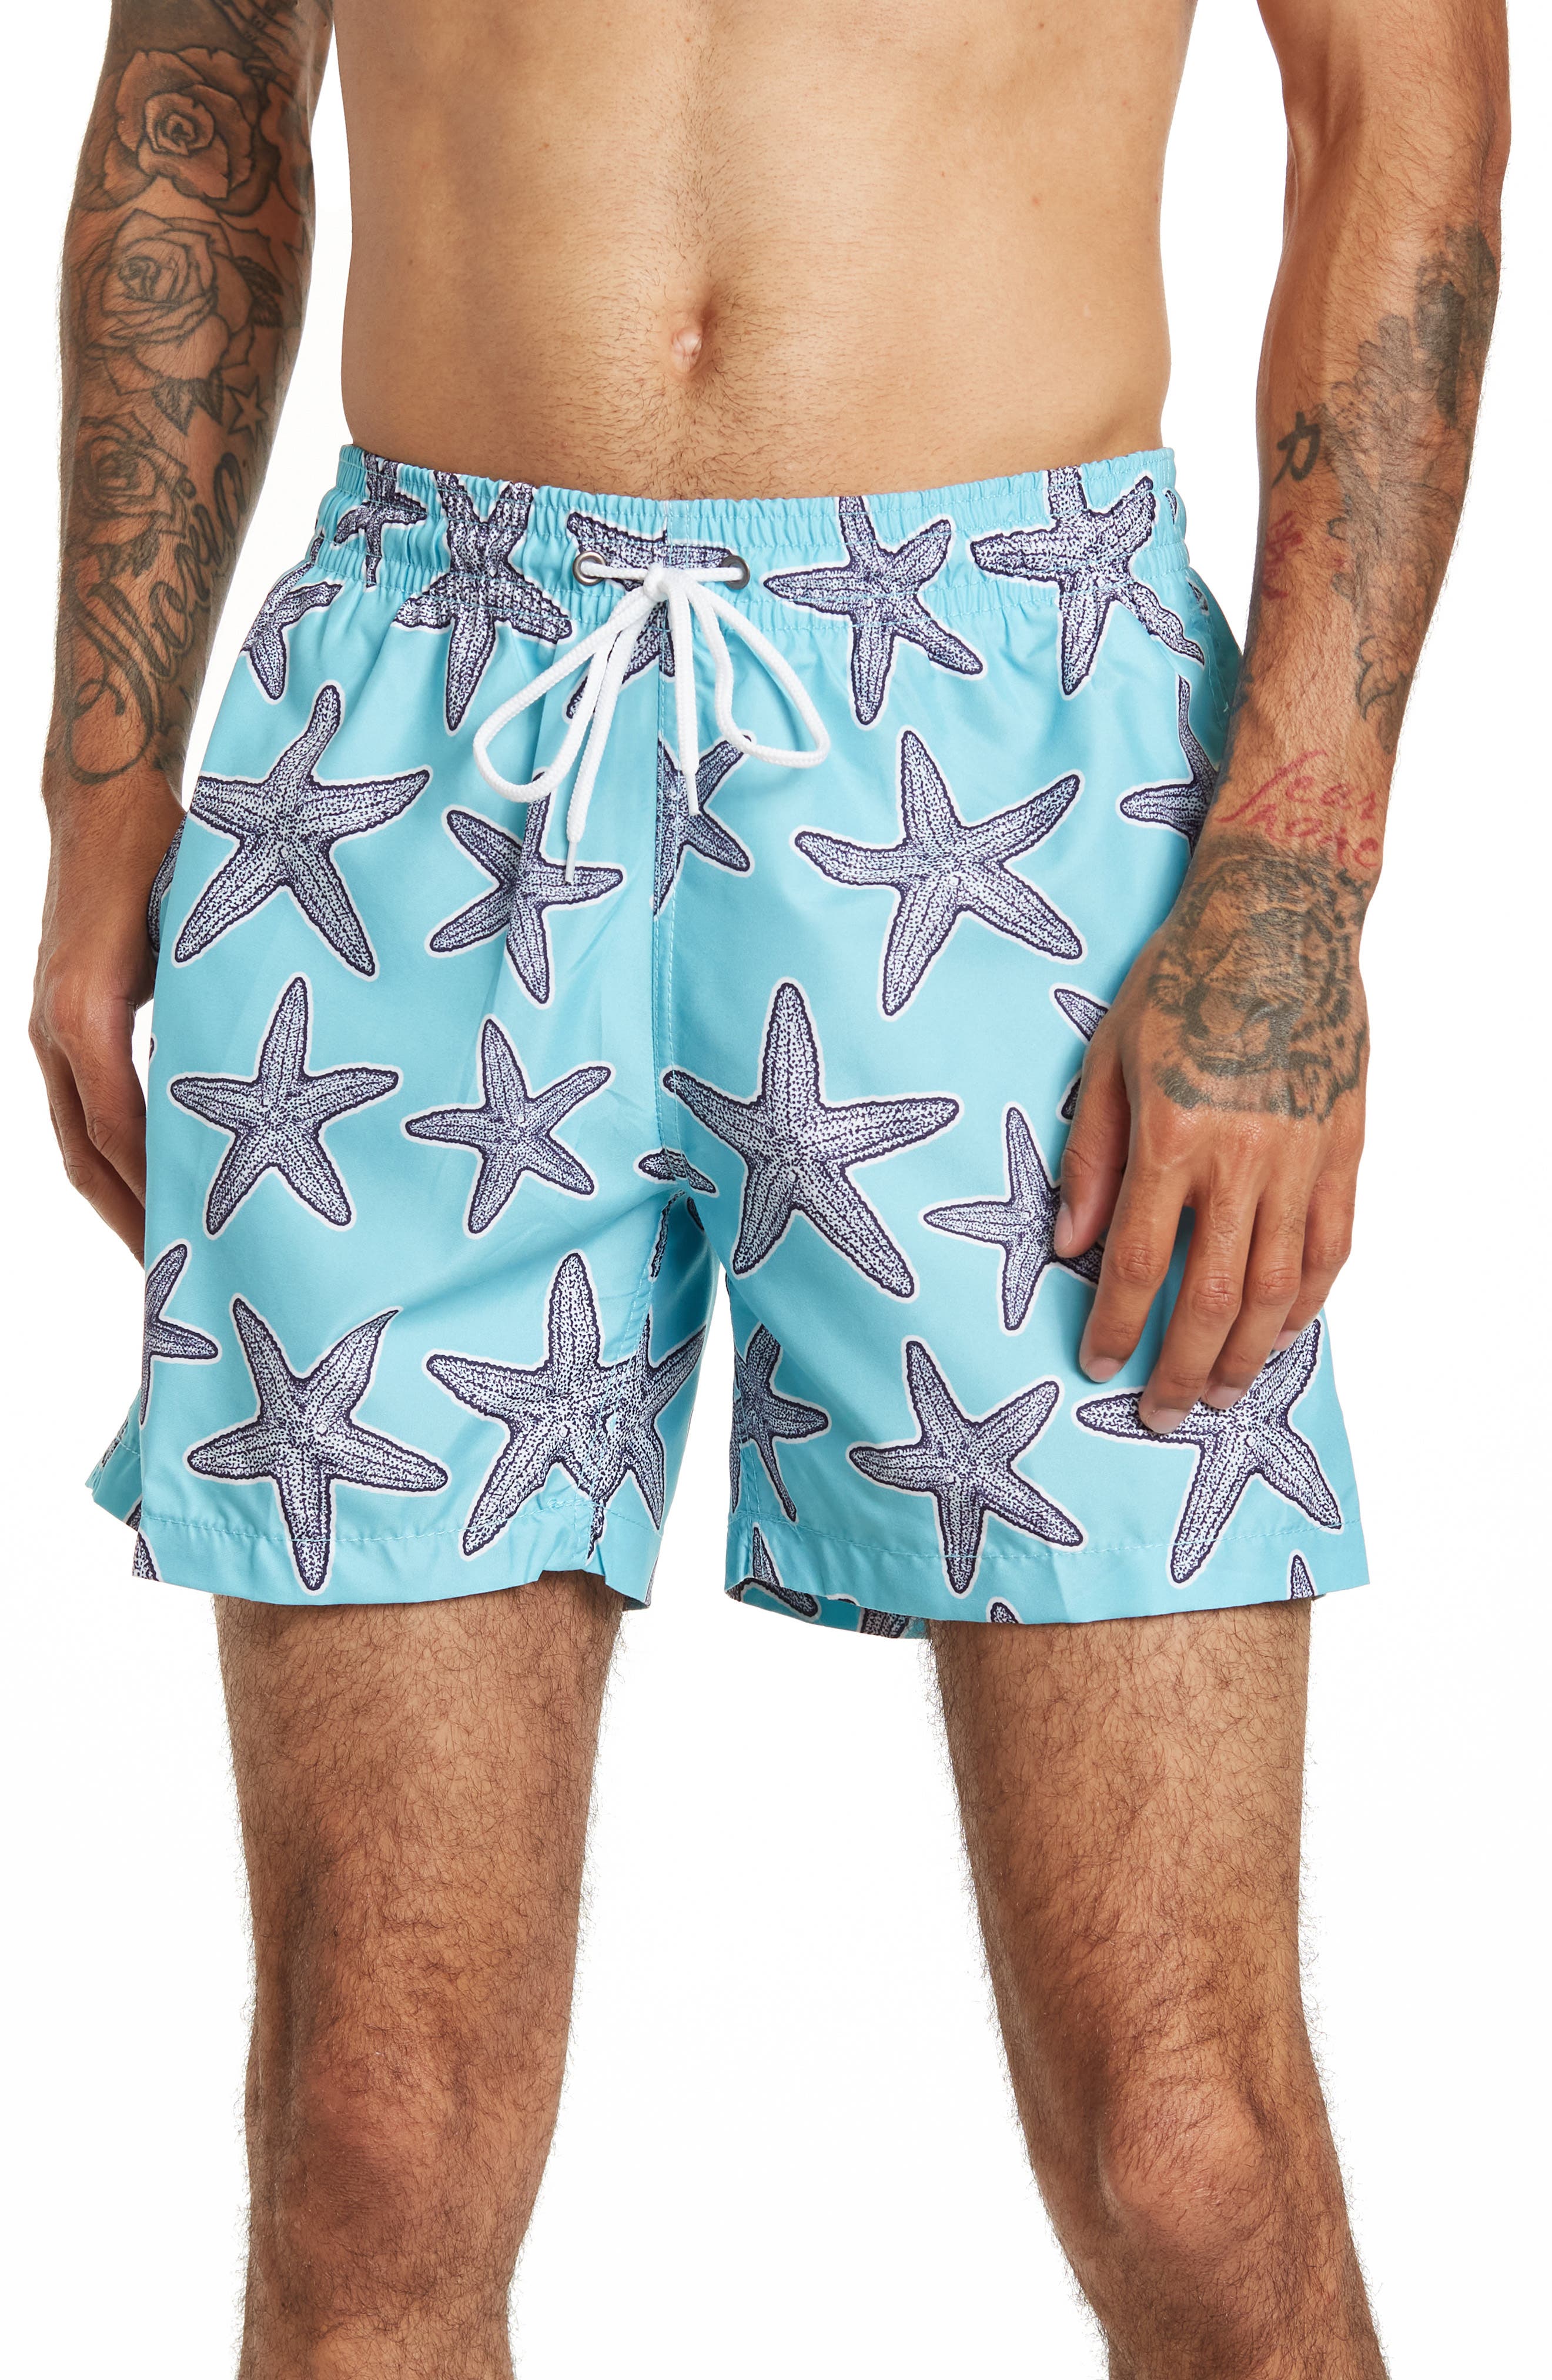 Details about   Trunks Surf & Swim Co Americana marine Compare From $54 To $22.99 NEW W/Tags 